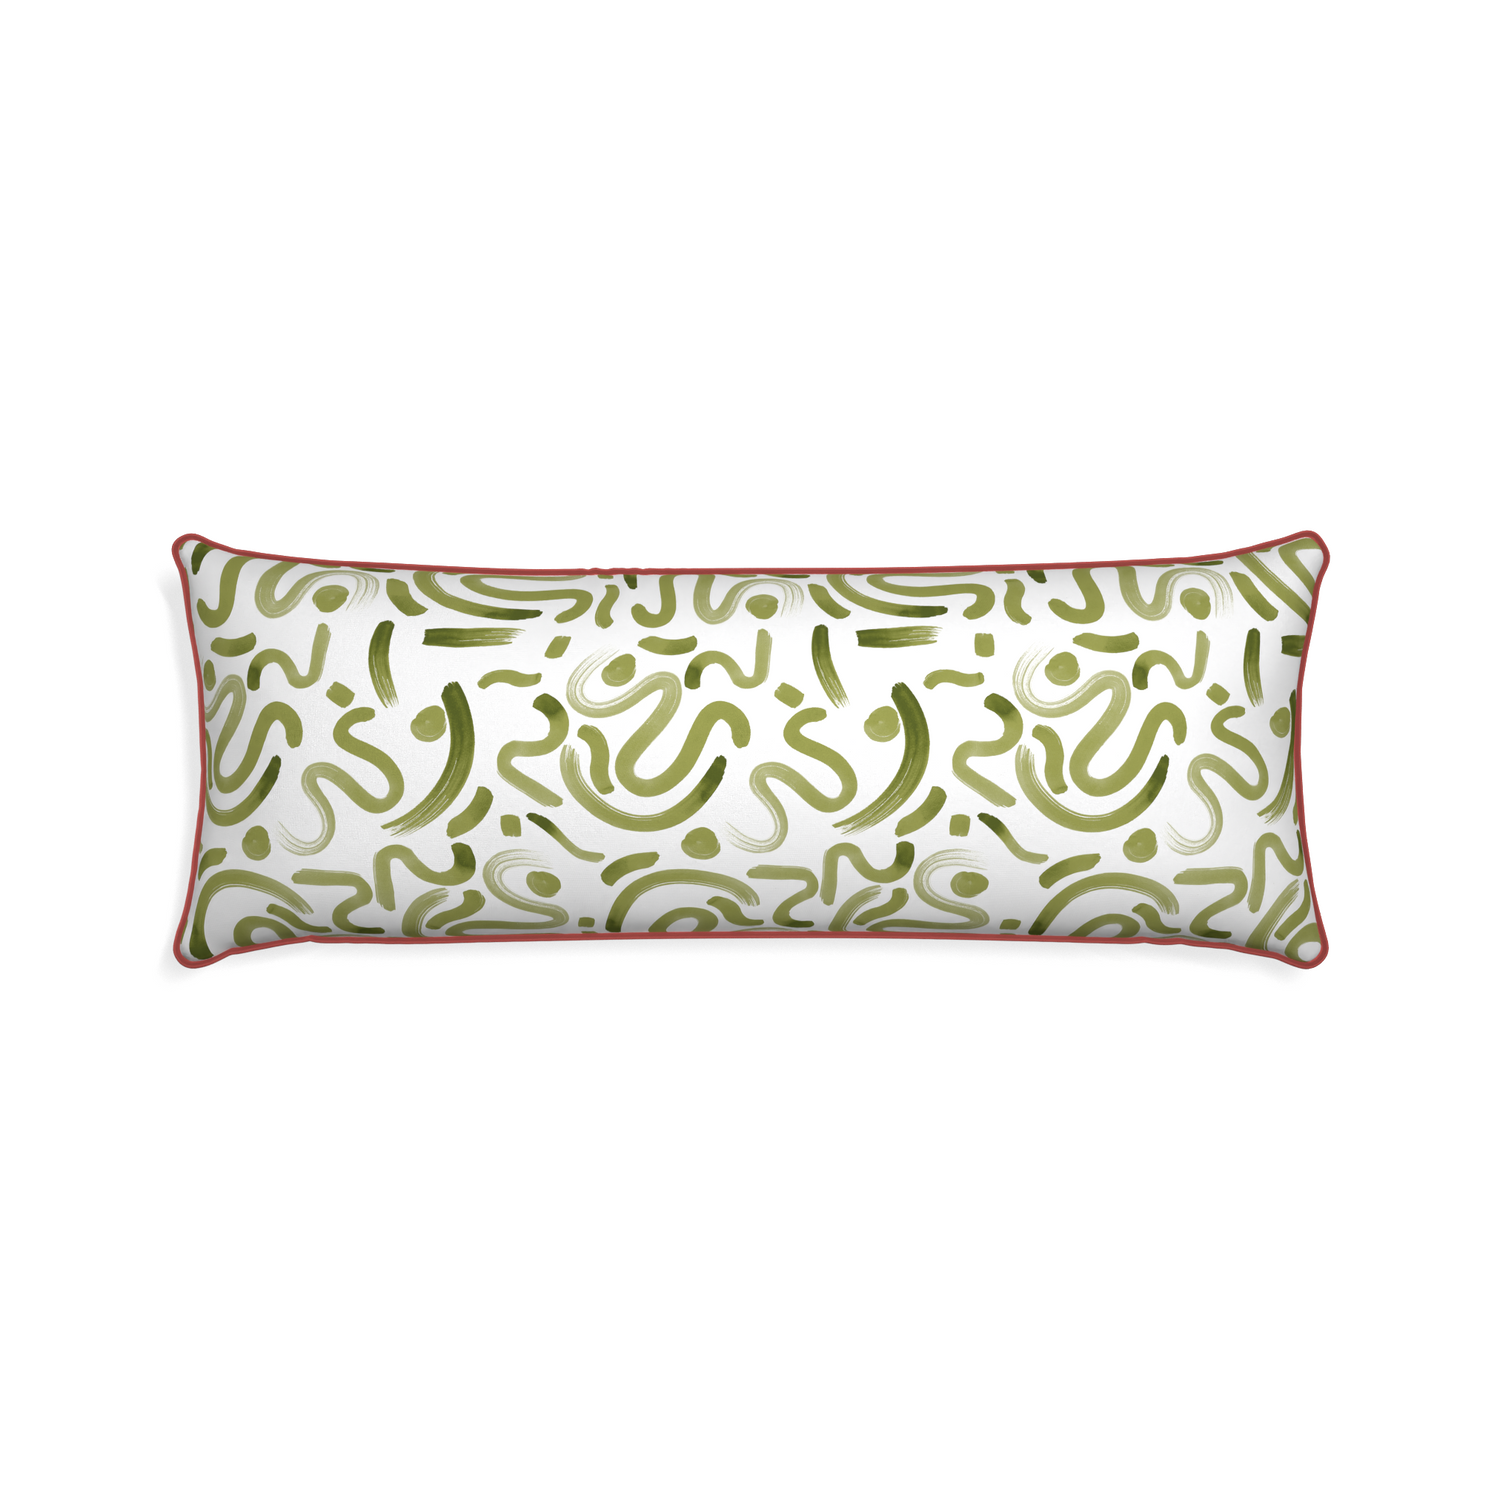 Xl-lumbar hockney moss custom moss greenpillow with c piping on white background